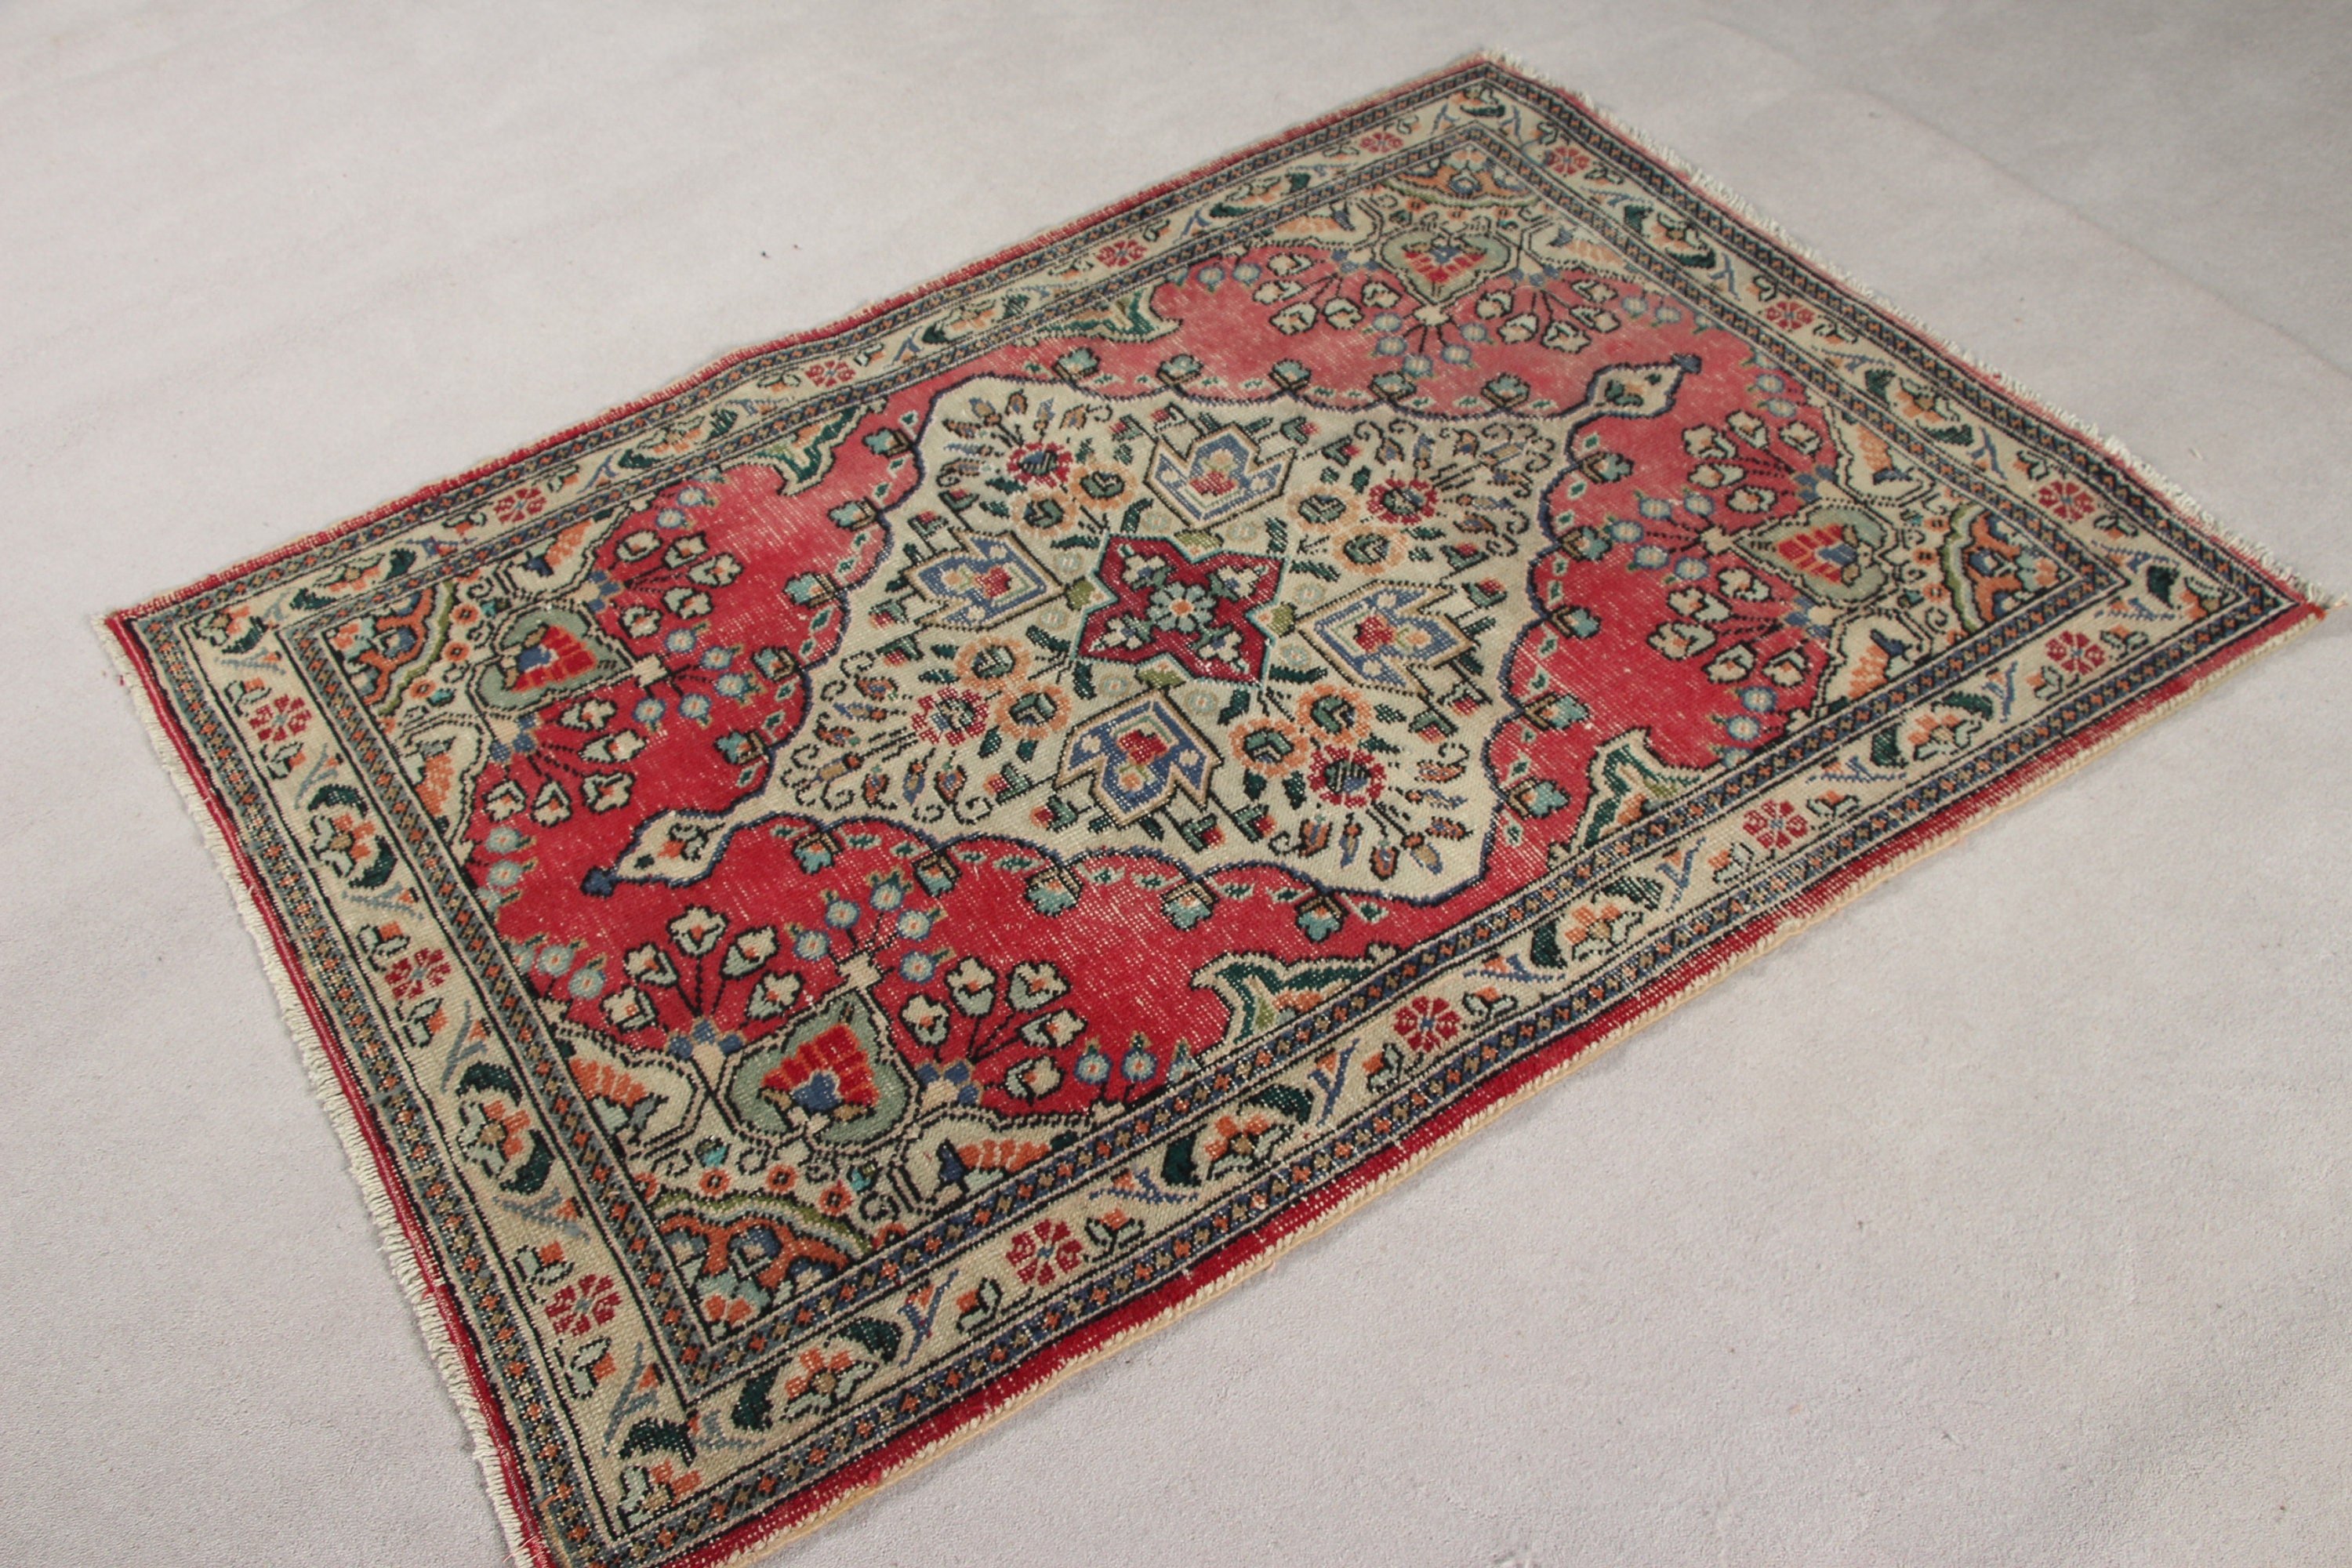 Floor Rug, 3.4x5 ft Accent Rug, Rugs for Kitchen, Red Oriental Rugs, Entry Rug, Turkish Rugs, Vintage Rug, Kitchen Rug, Bedroom Rugs